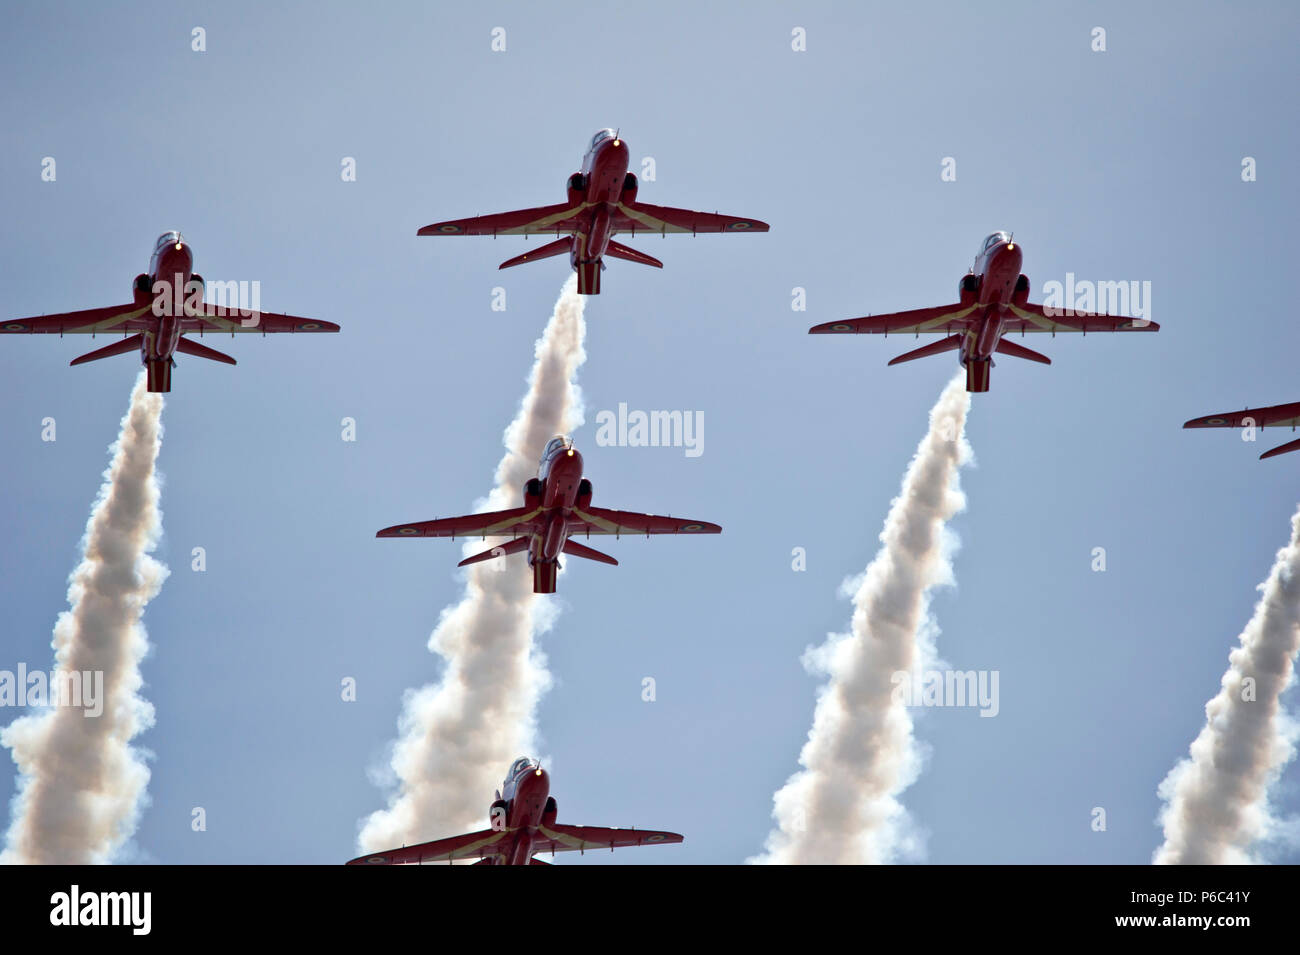 The Red Arrows in RAF 100th Anniversary livery, Weston Air Festival 2018 Stock Photo